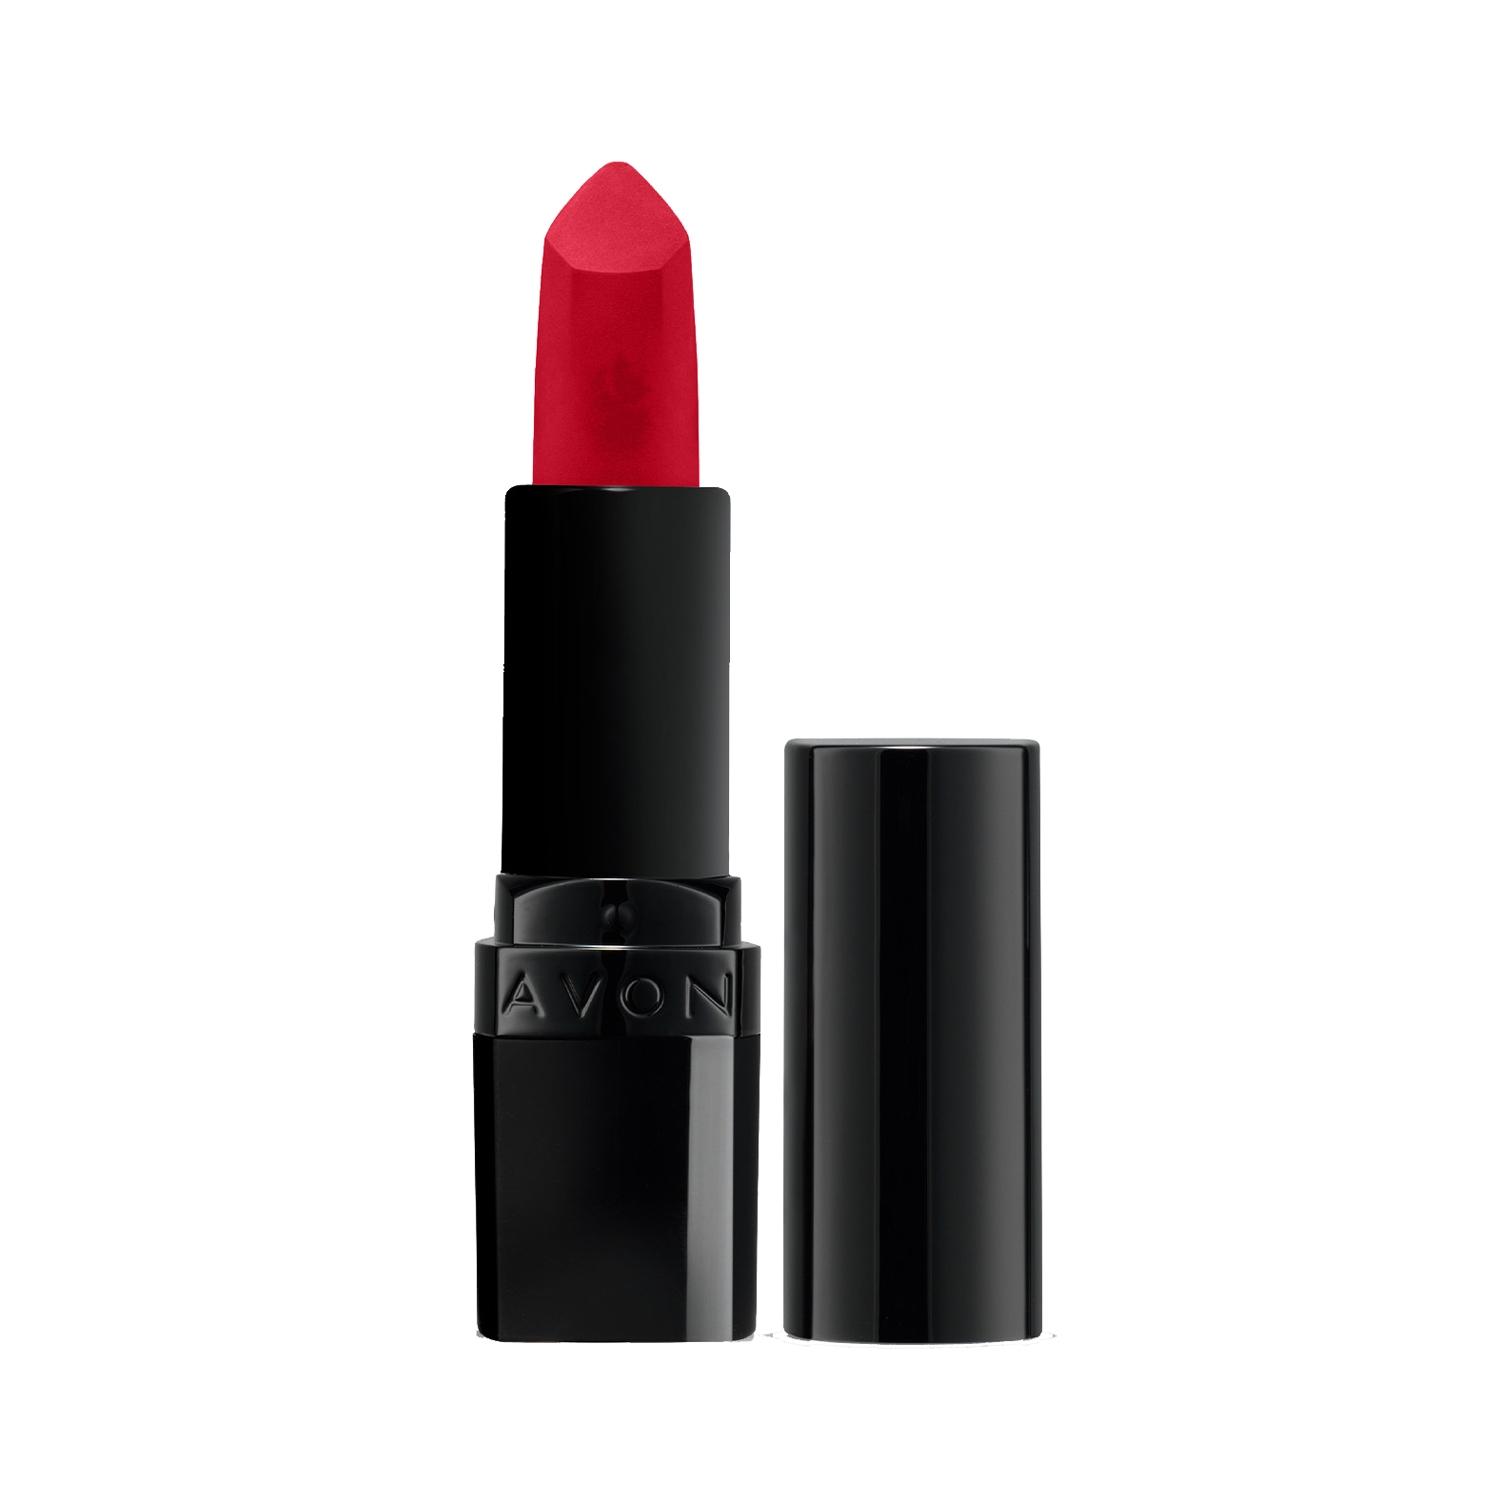 avon ultra perfectly matte lipstick - coral fever (4g)